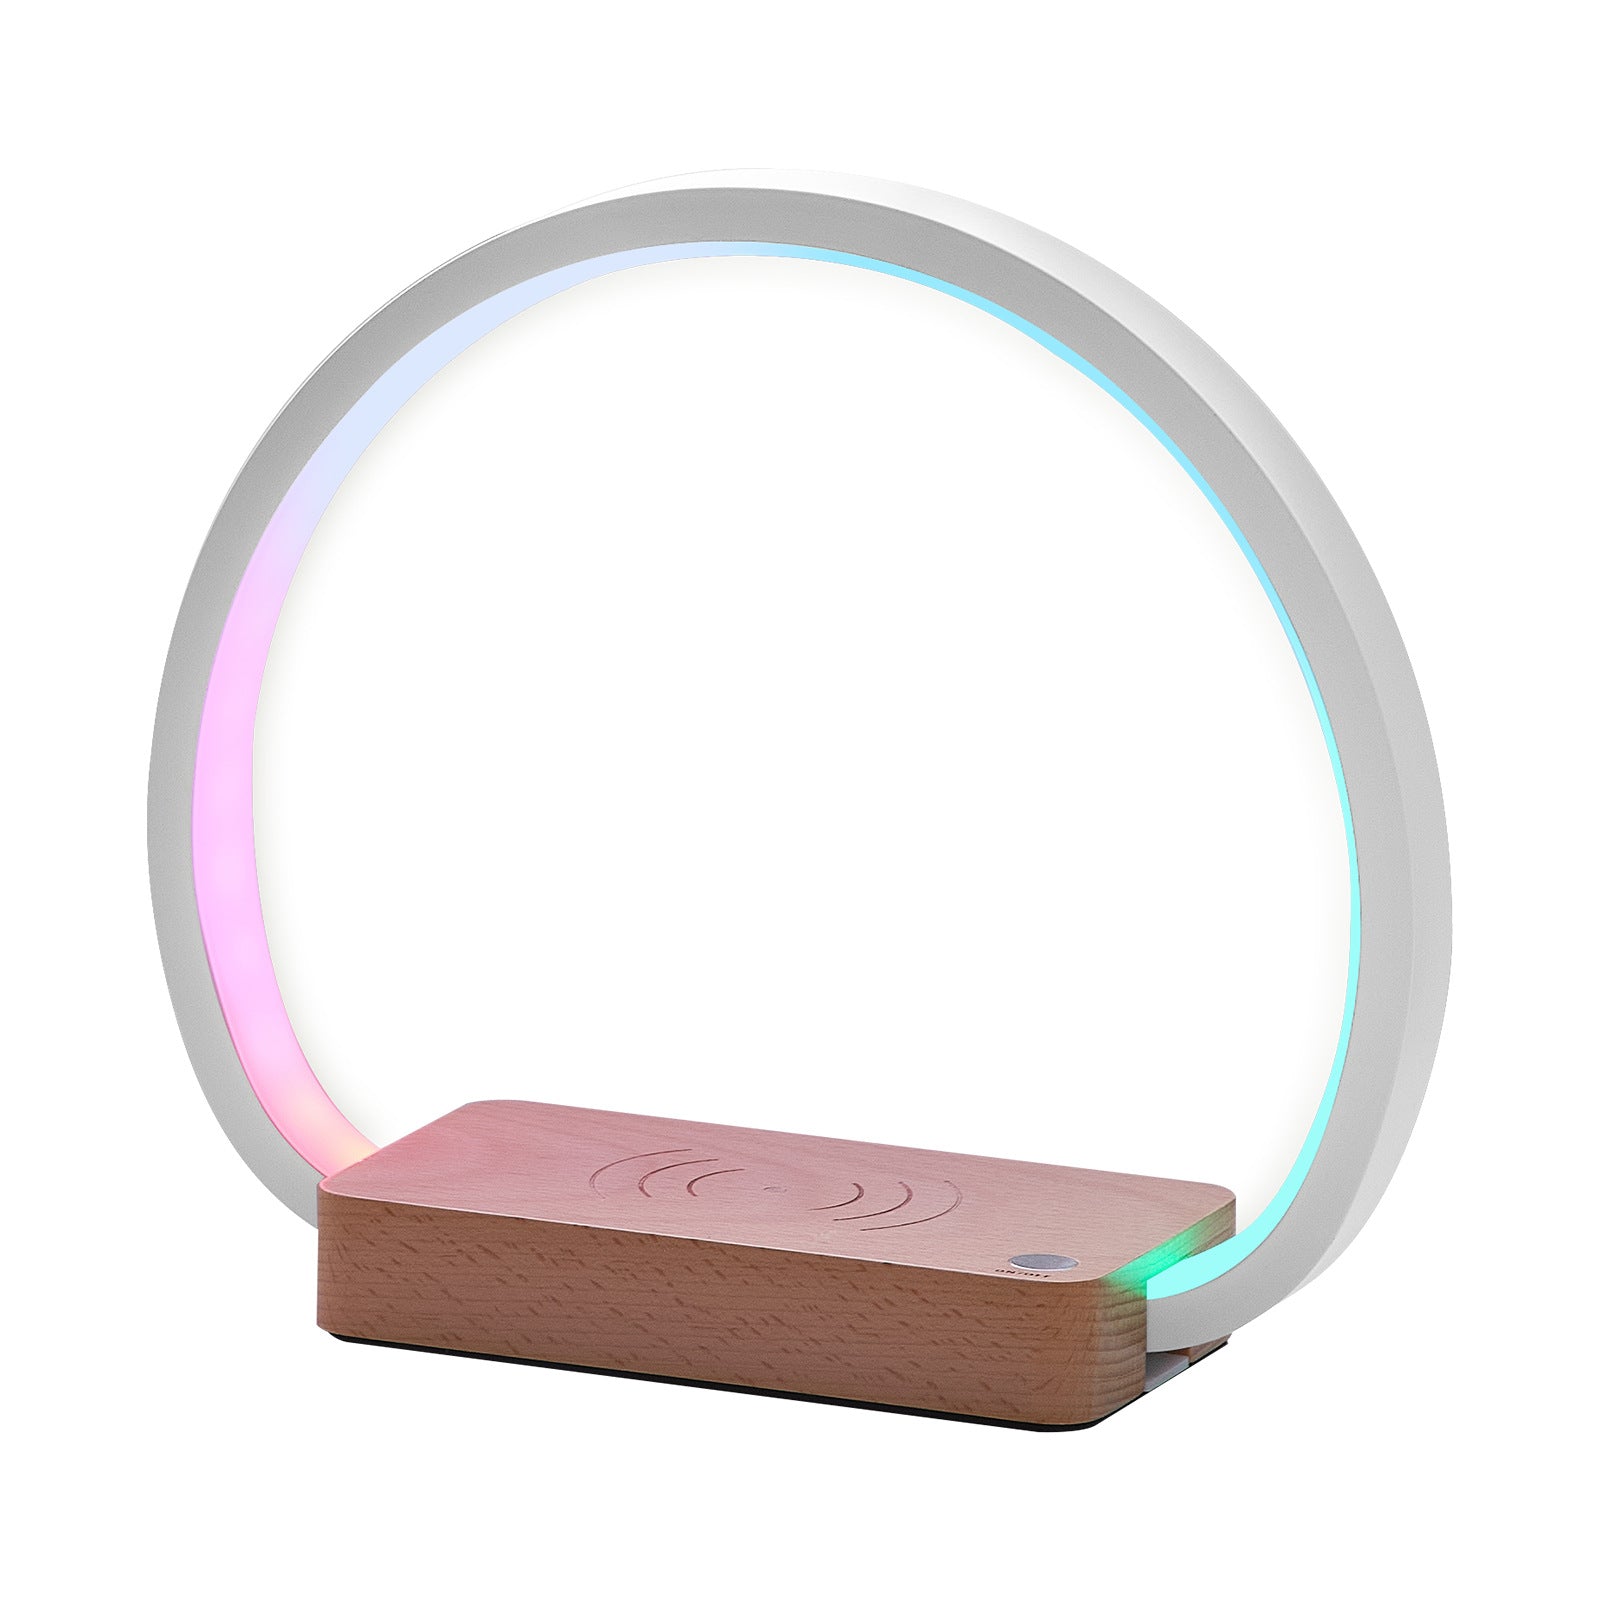 EcoTune™ by Lumious Lighting - Multifunctional Wooden Speaker Lamp with Wireless Charging